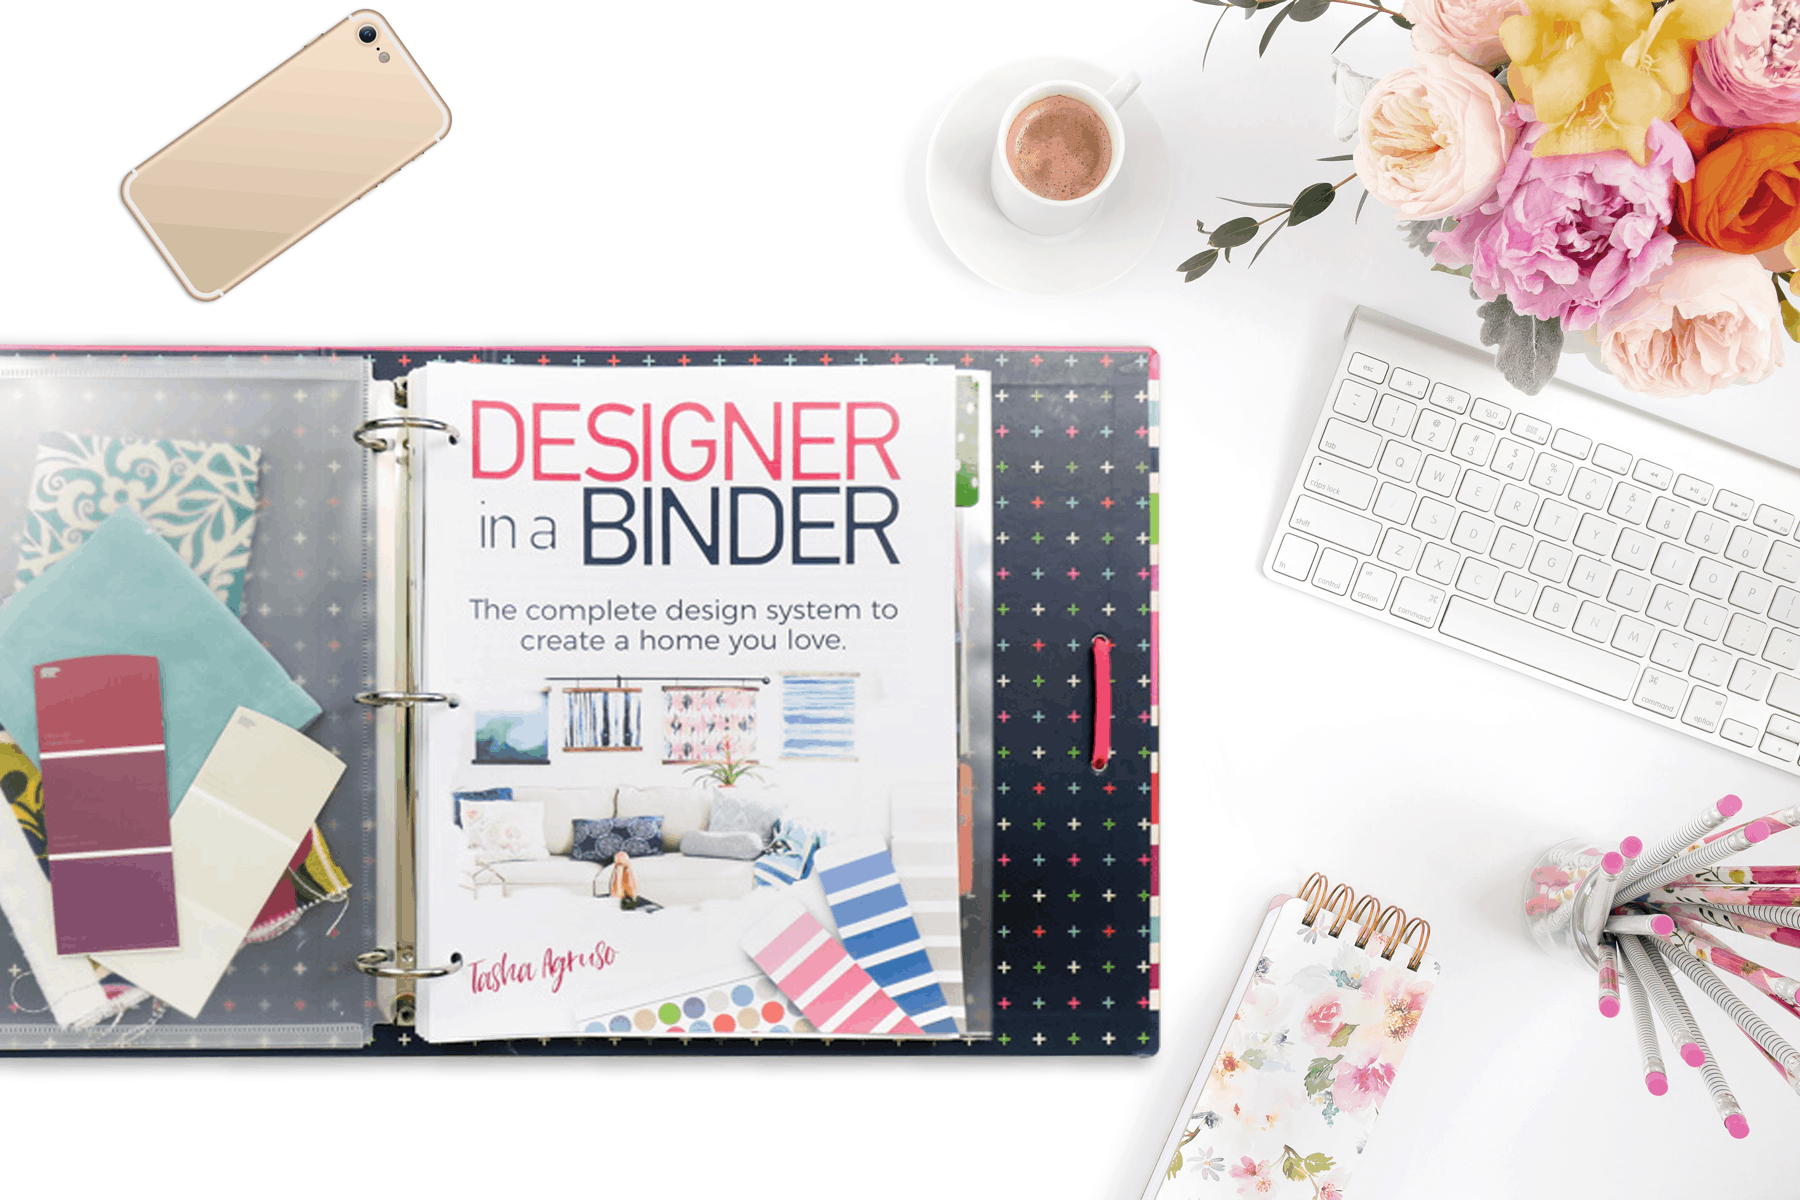 If you want to create a home you love, but can't find affordable interior design services, are overwhelmed by interior design software or interior design books, THIS is the answer for you! Designer in a Binder allows you to become your own interior designer without spending a fortune.